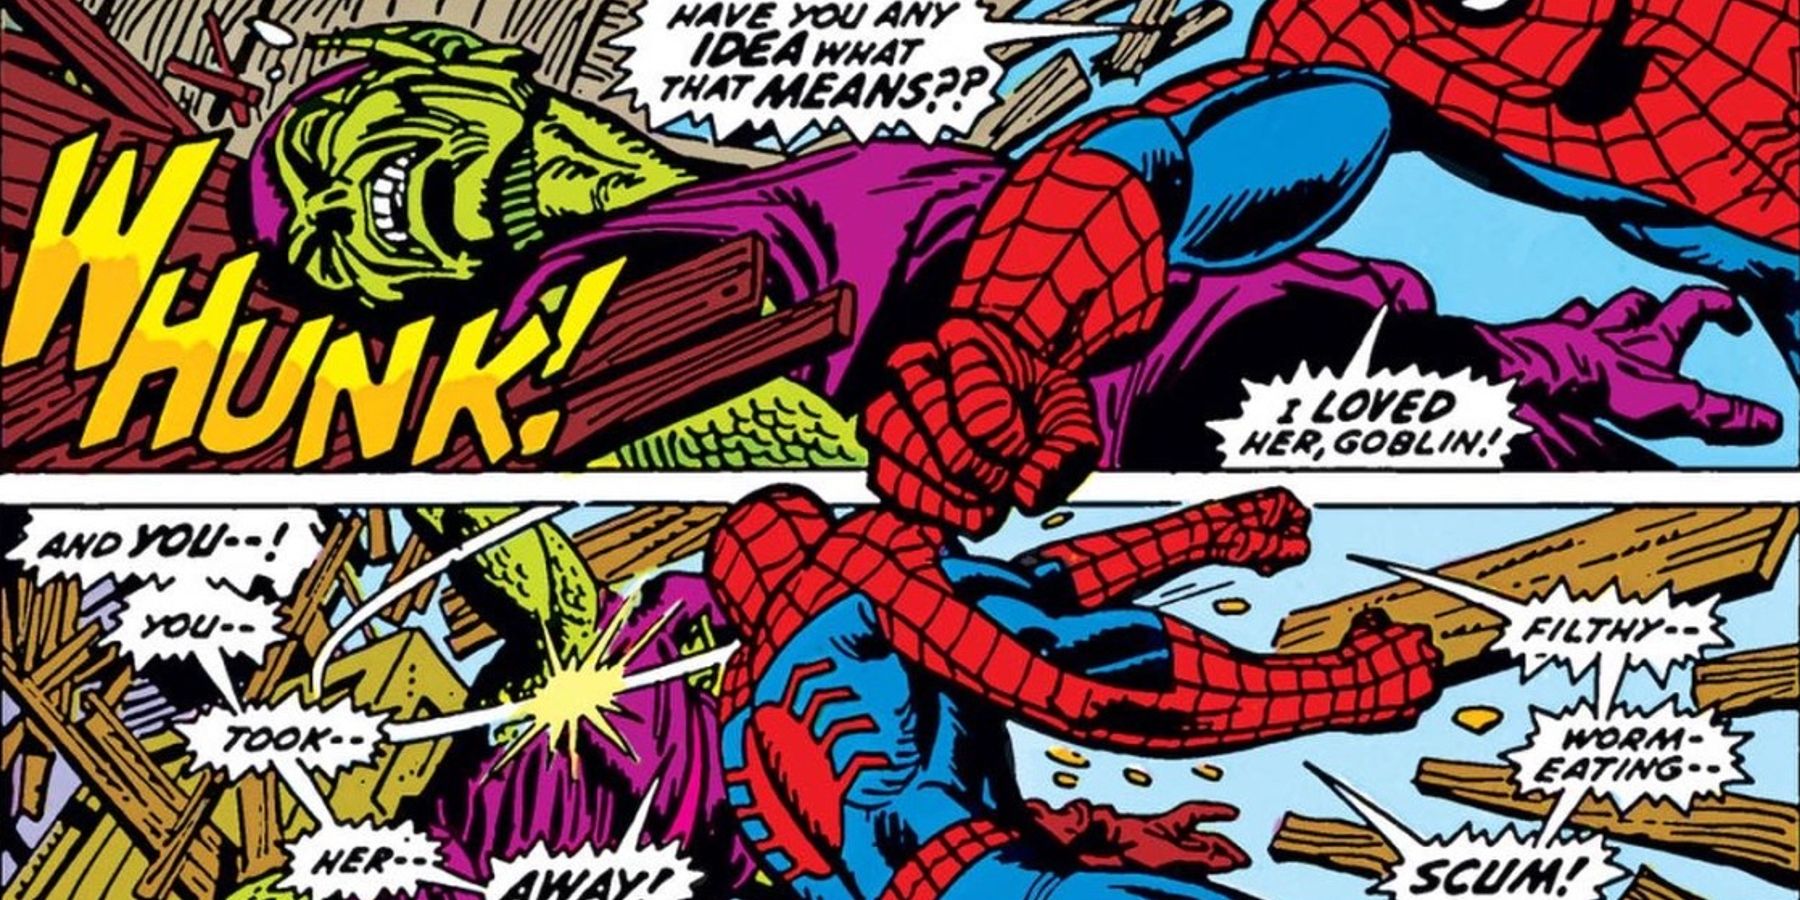 Spider-Man unleashing his anger on Green Goblin in The Amazing Spider-Man comics